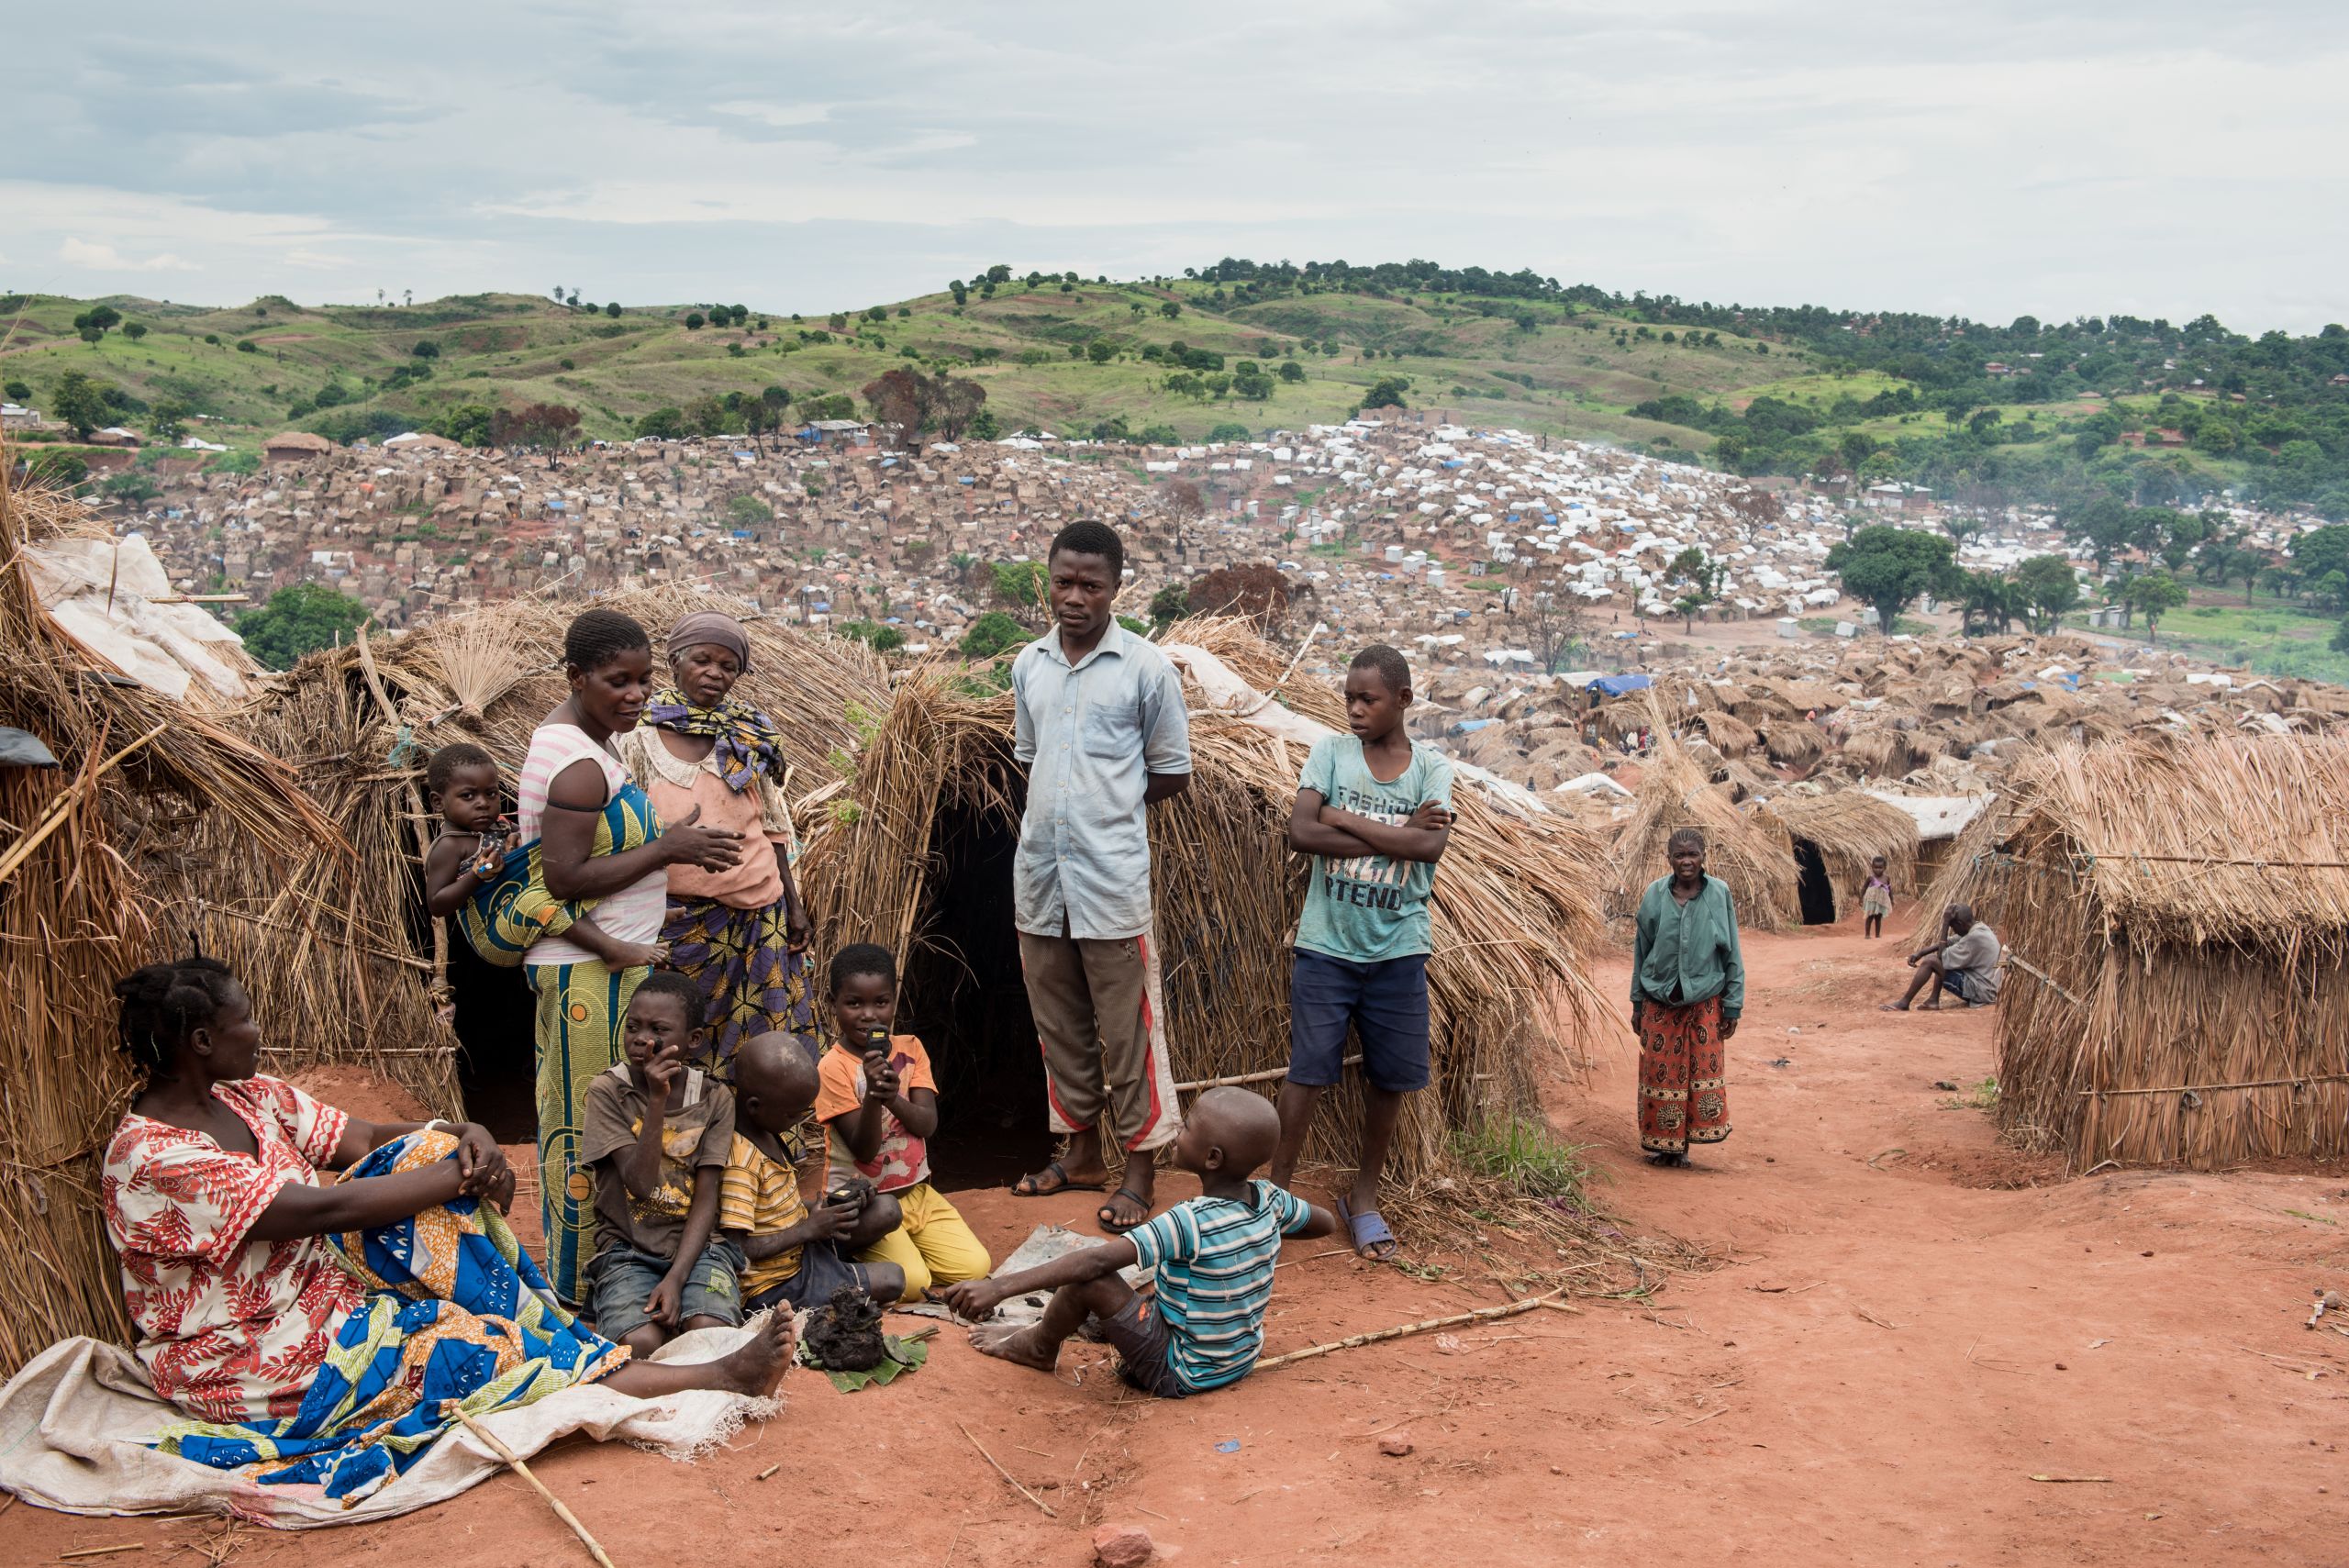 The Katanika camp is located outside of Kalemie, DR Congo, and houses about 70,000 people who have fled from the violence in the country. Photo: Christian Jepsen/NRC